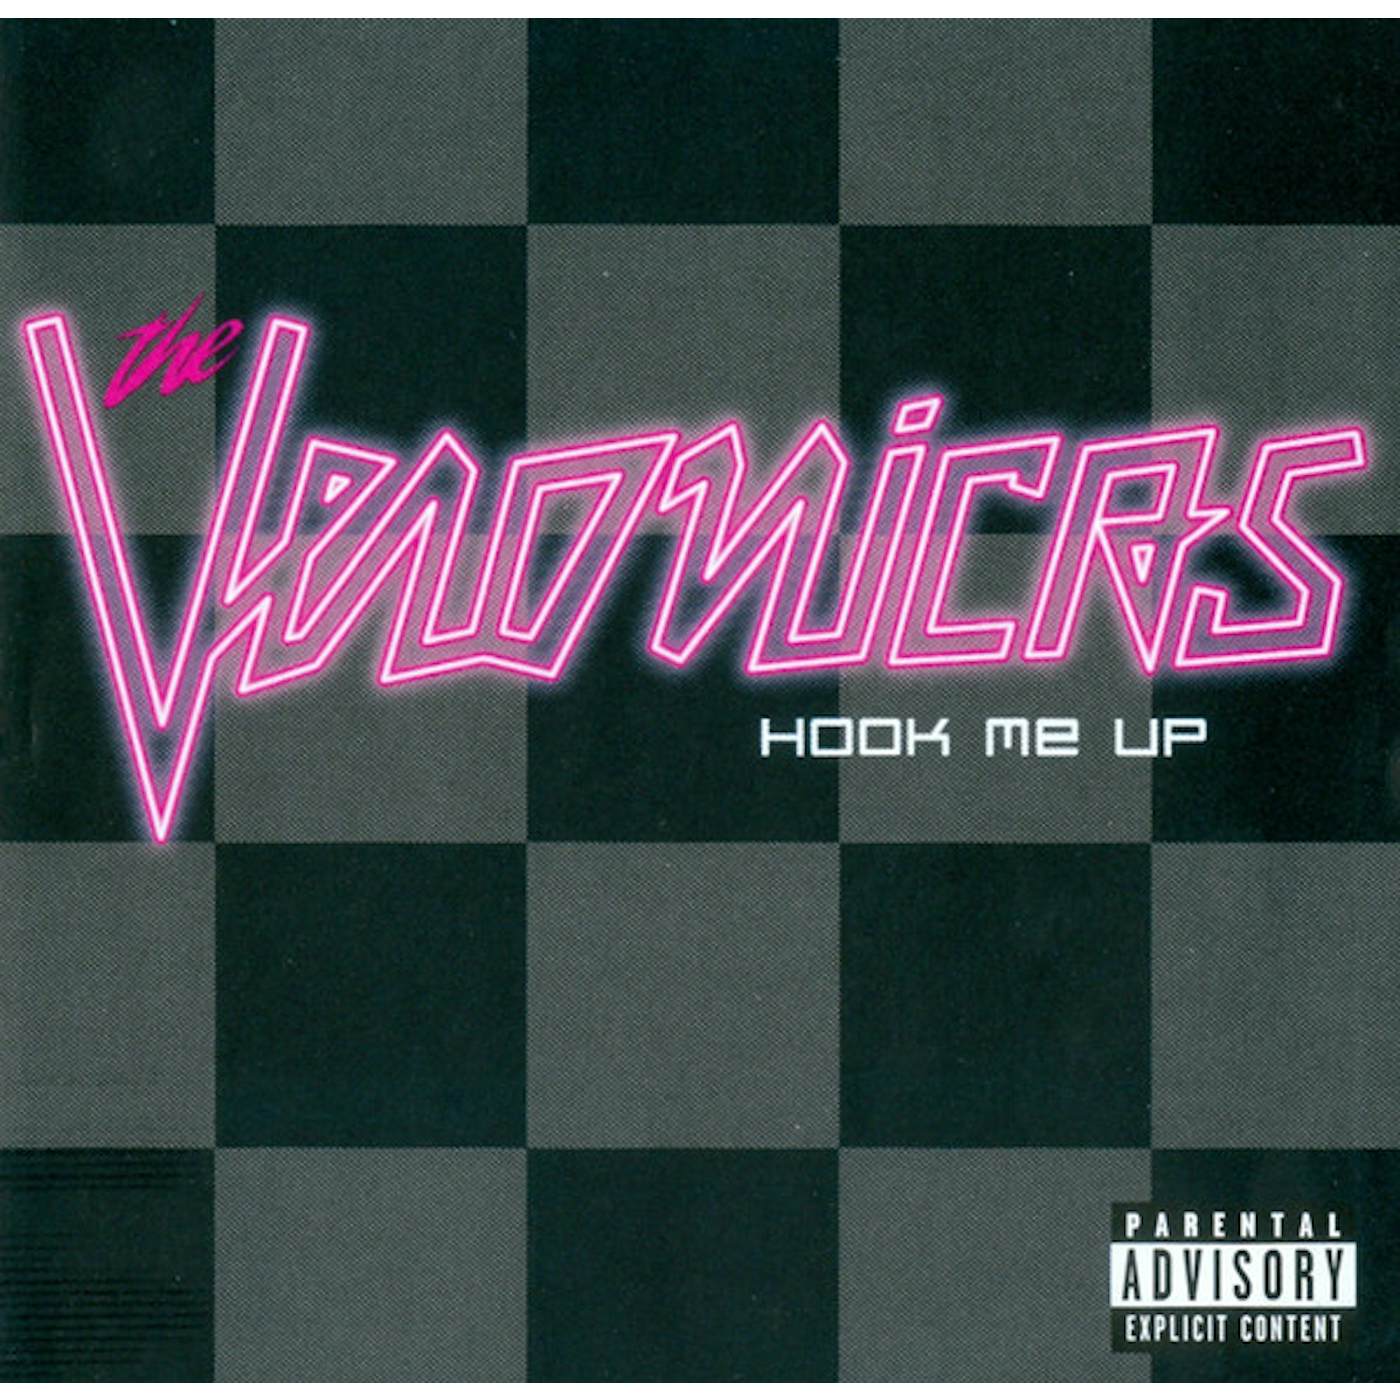 The Veronicas Hook Me Up Vinyl Record